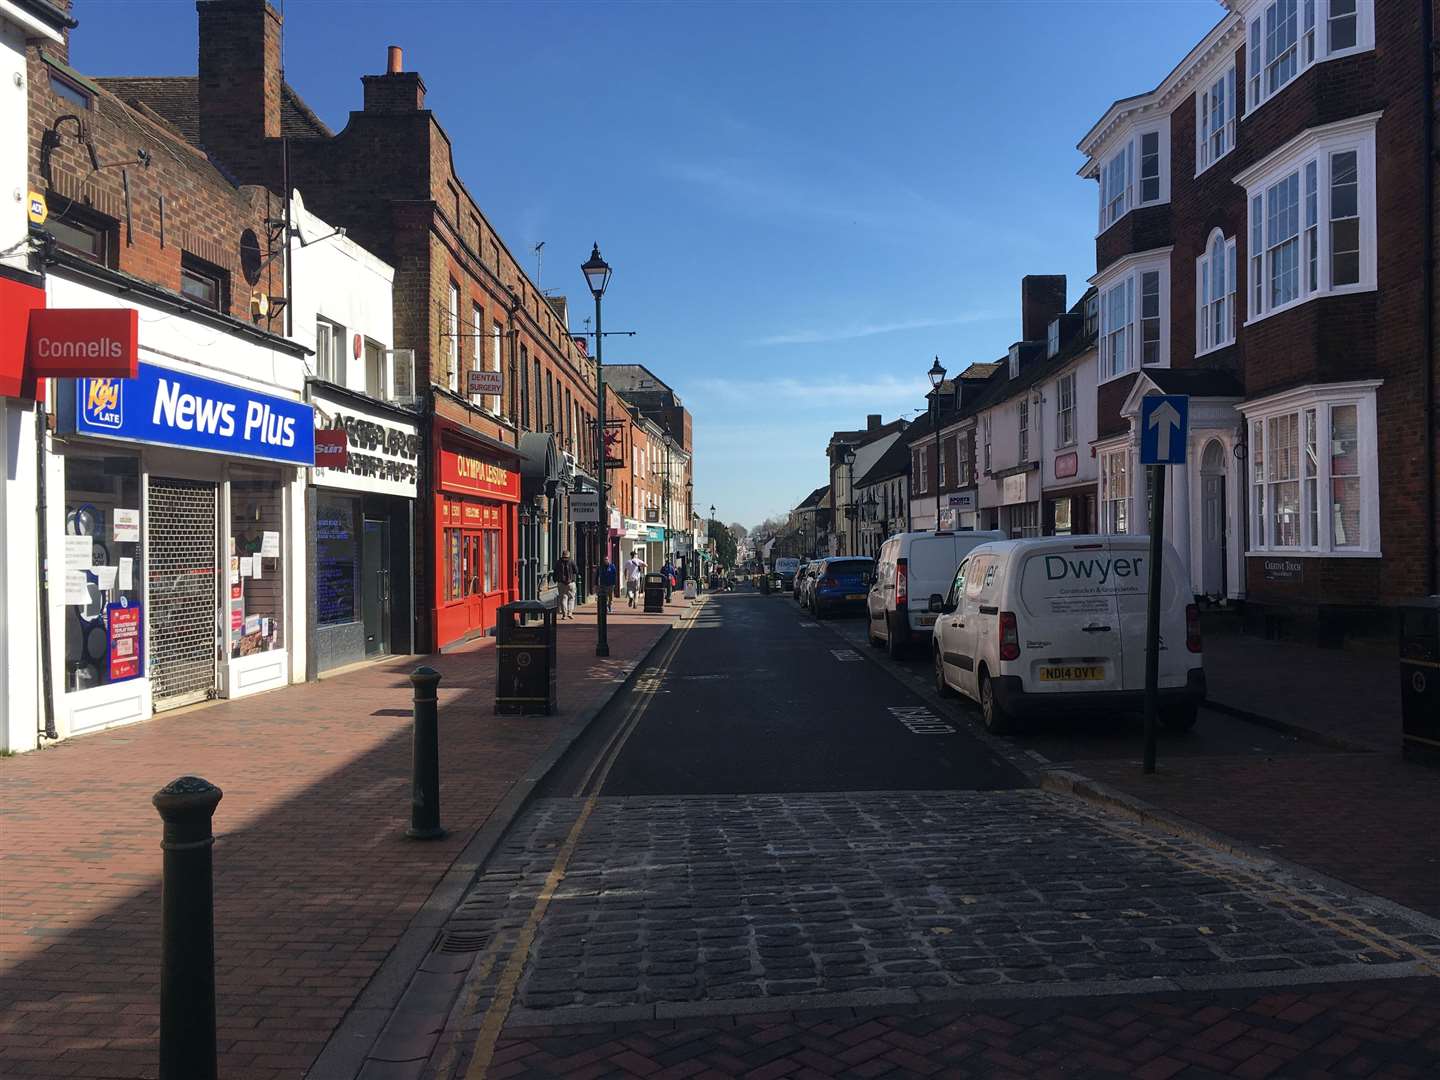 The reported thefts occurred in Sittingbourne High Street